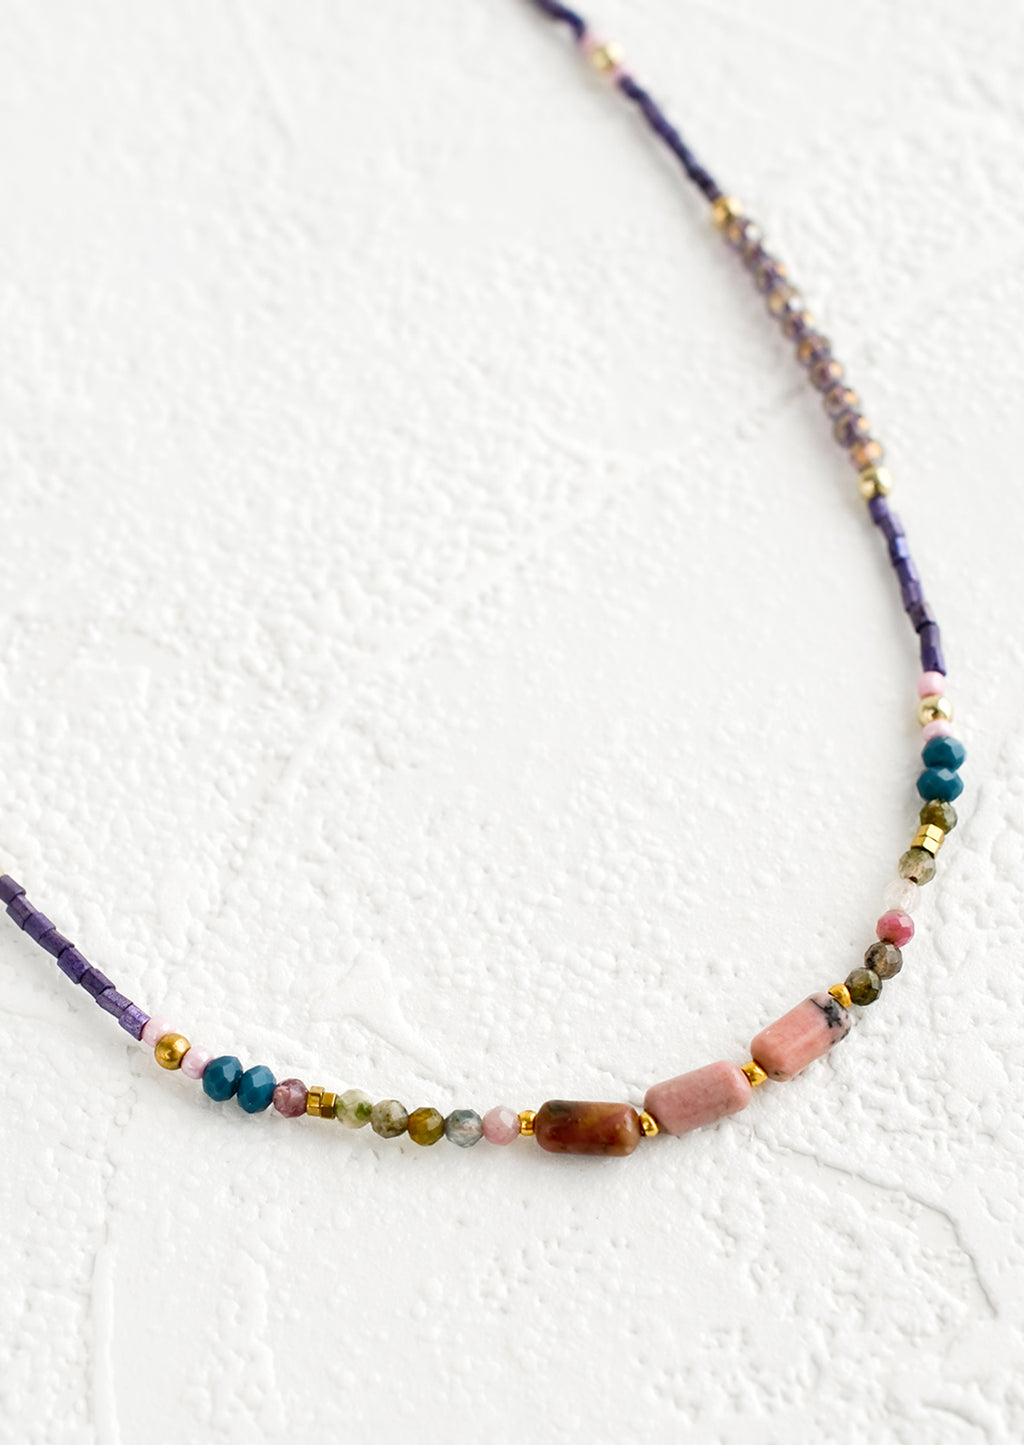 2: Beaded necklace with varied glass and gemstone beads.